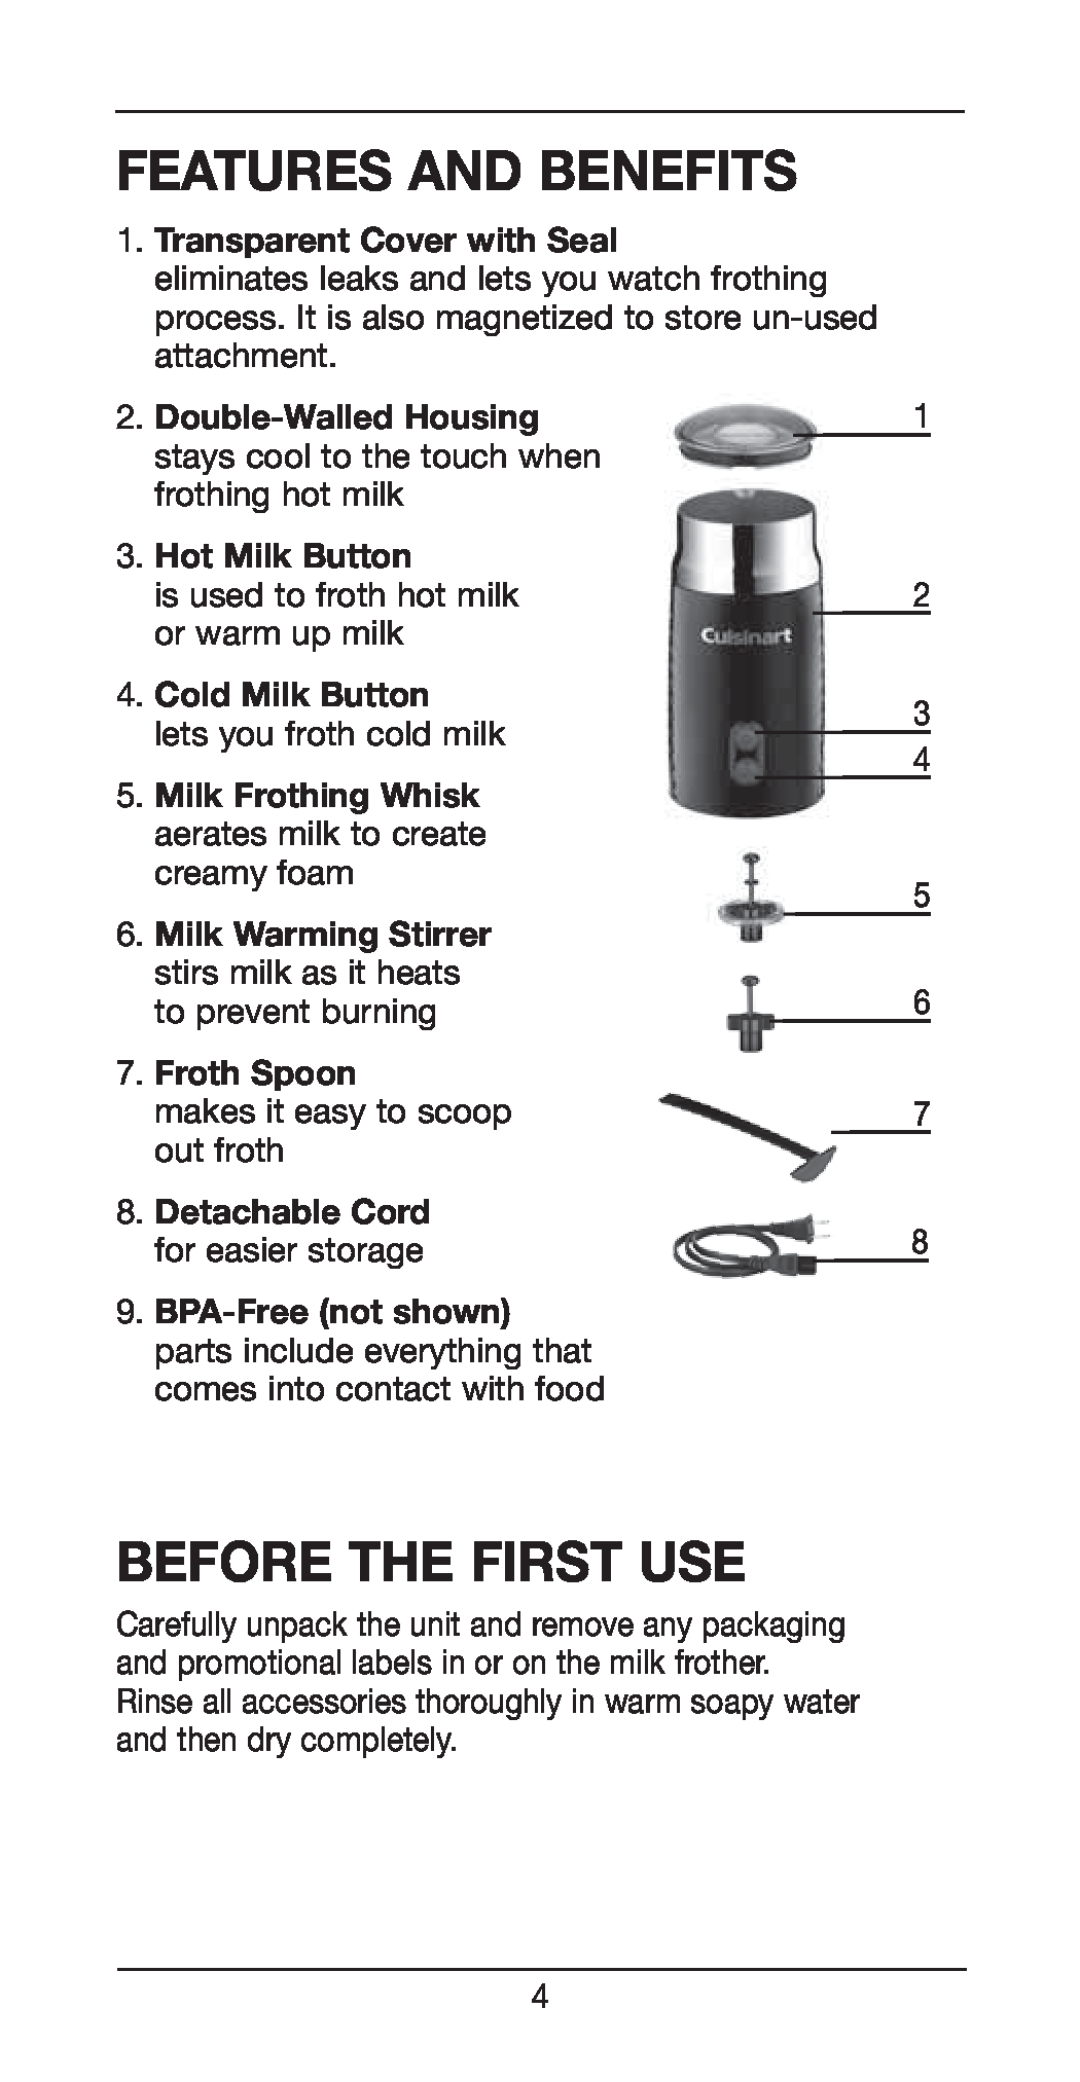 Cuisinart Tazzaccino Milk Frother Features And Benefits, Before The First Use, Transparent Cover with Seal, Froth Spoon 